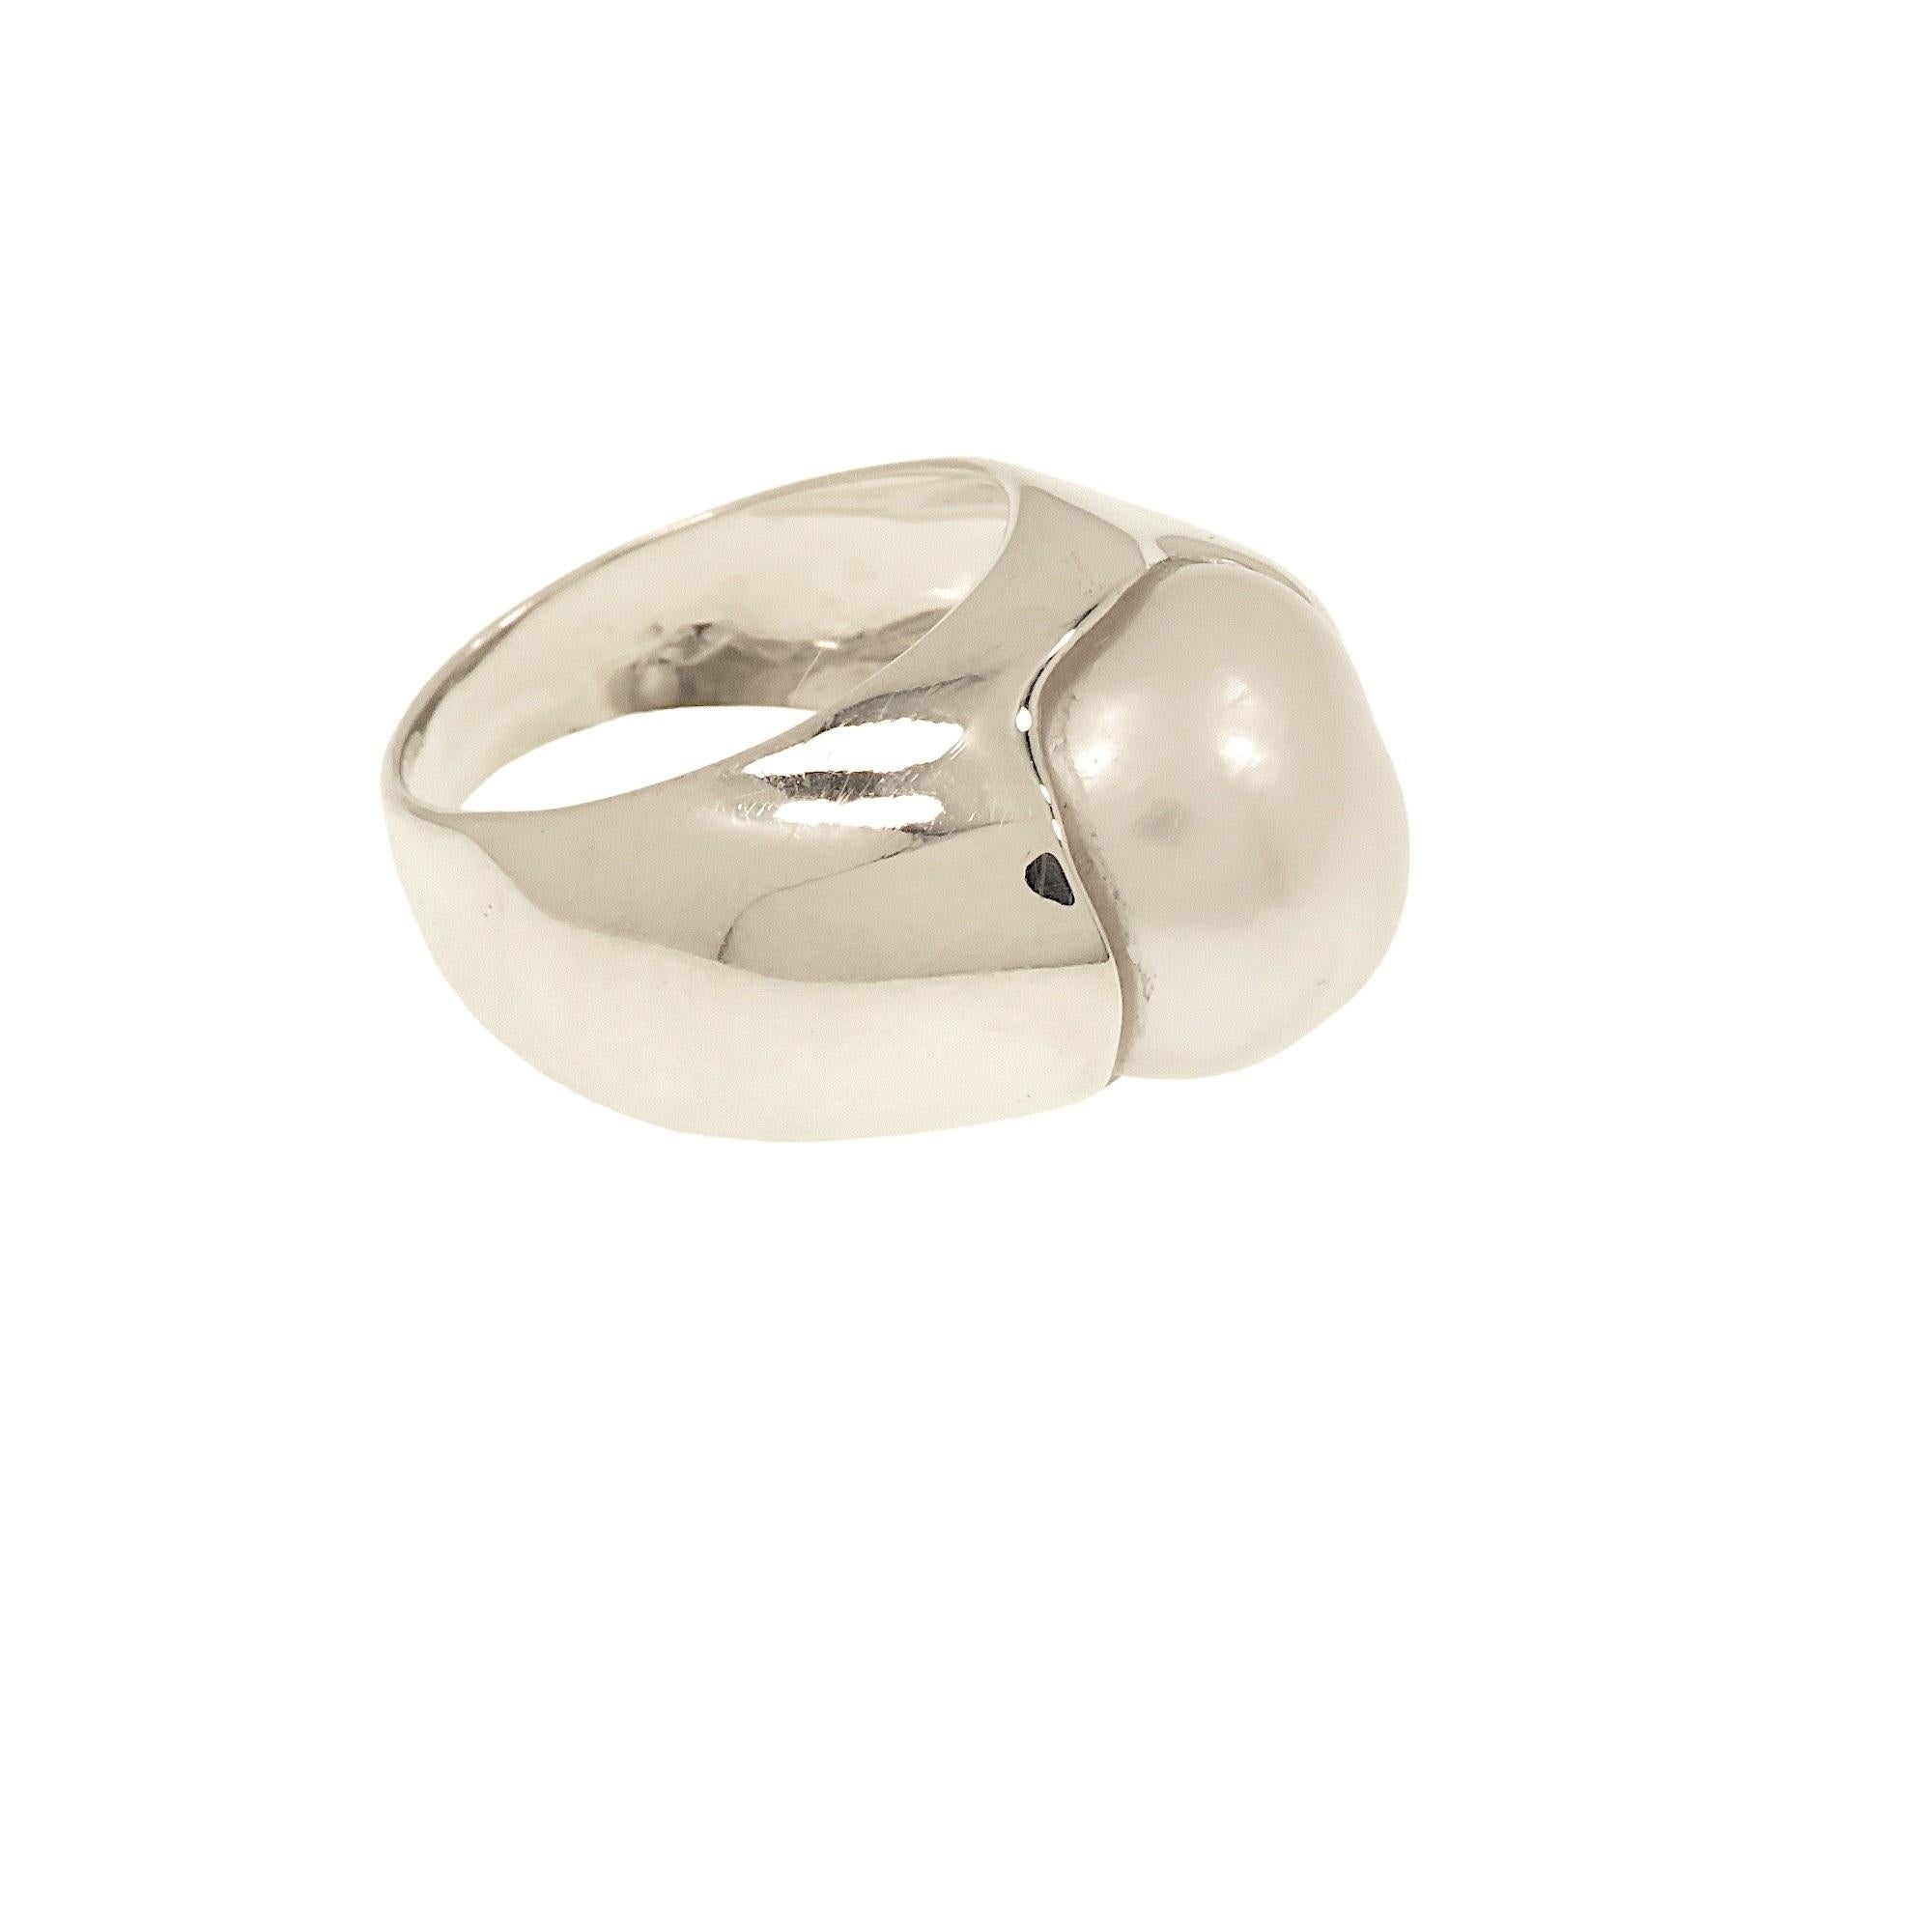 Uncut Botta jewelry ring with Australian pearl in white gold For Sale